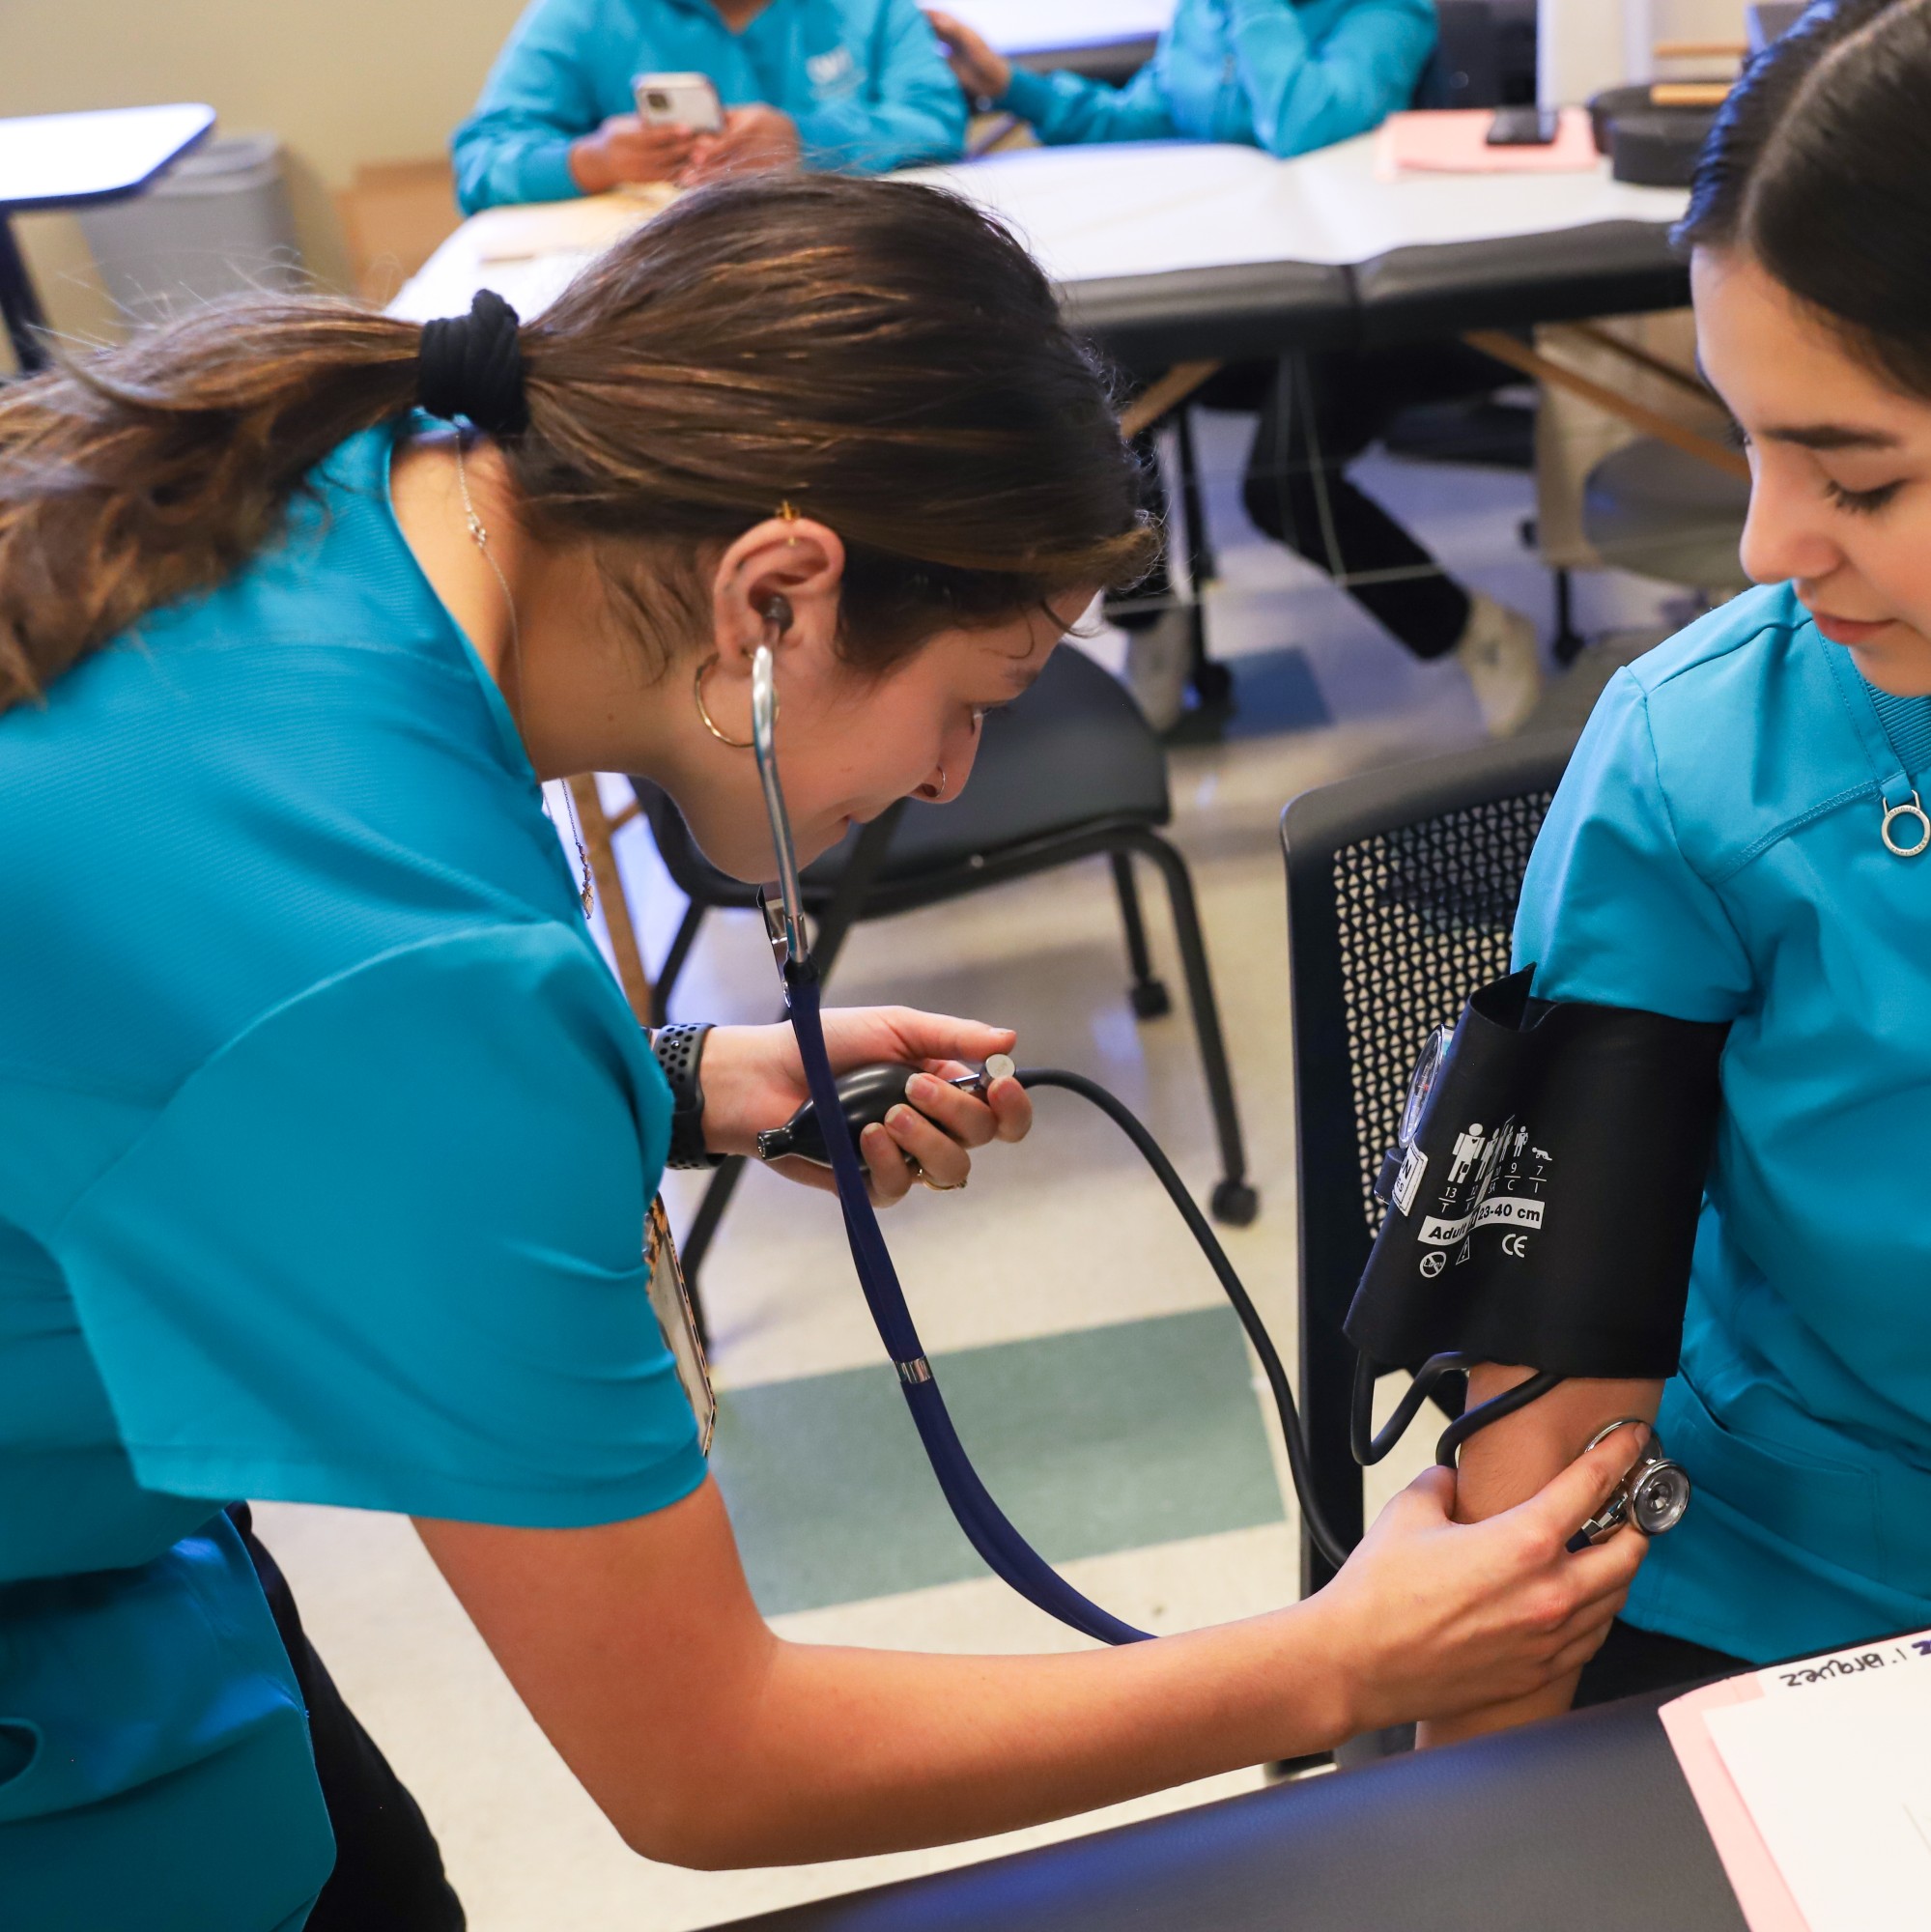 Medical assistant students working together in lab